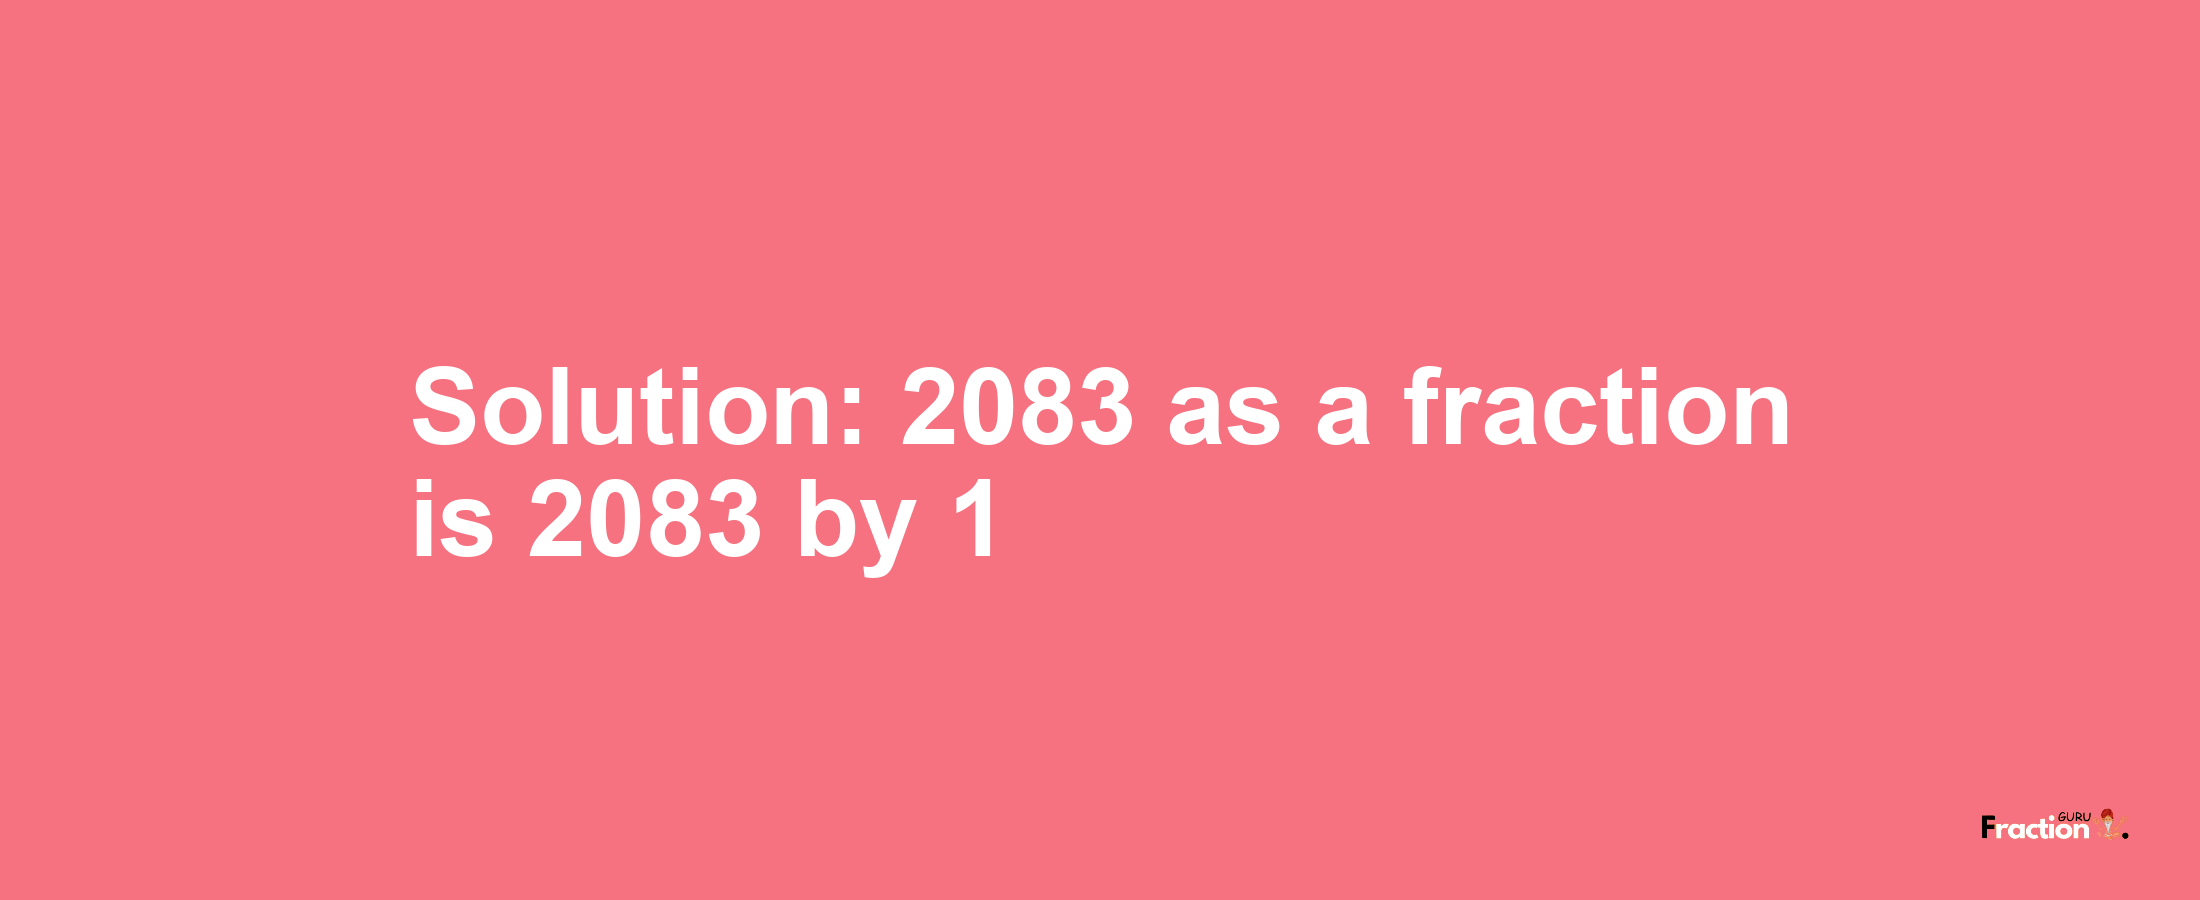 Solution:2083 as a fraction is 2083/1